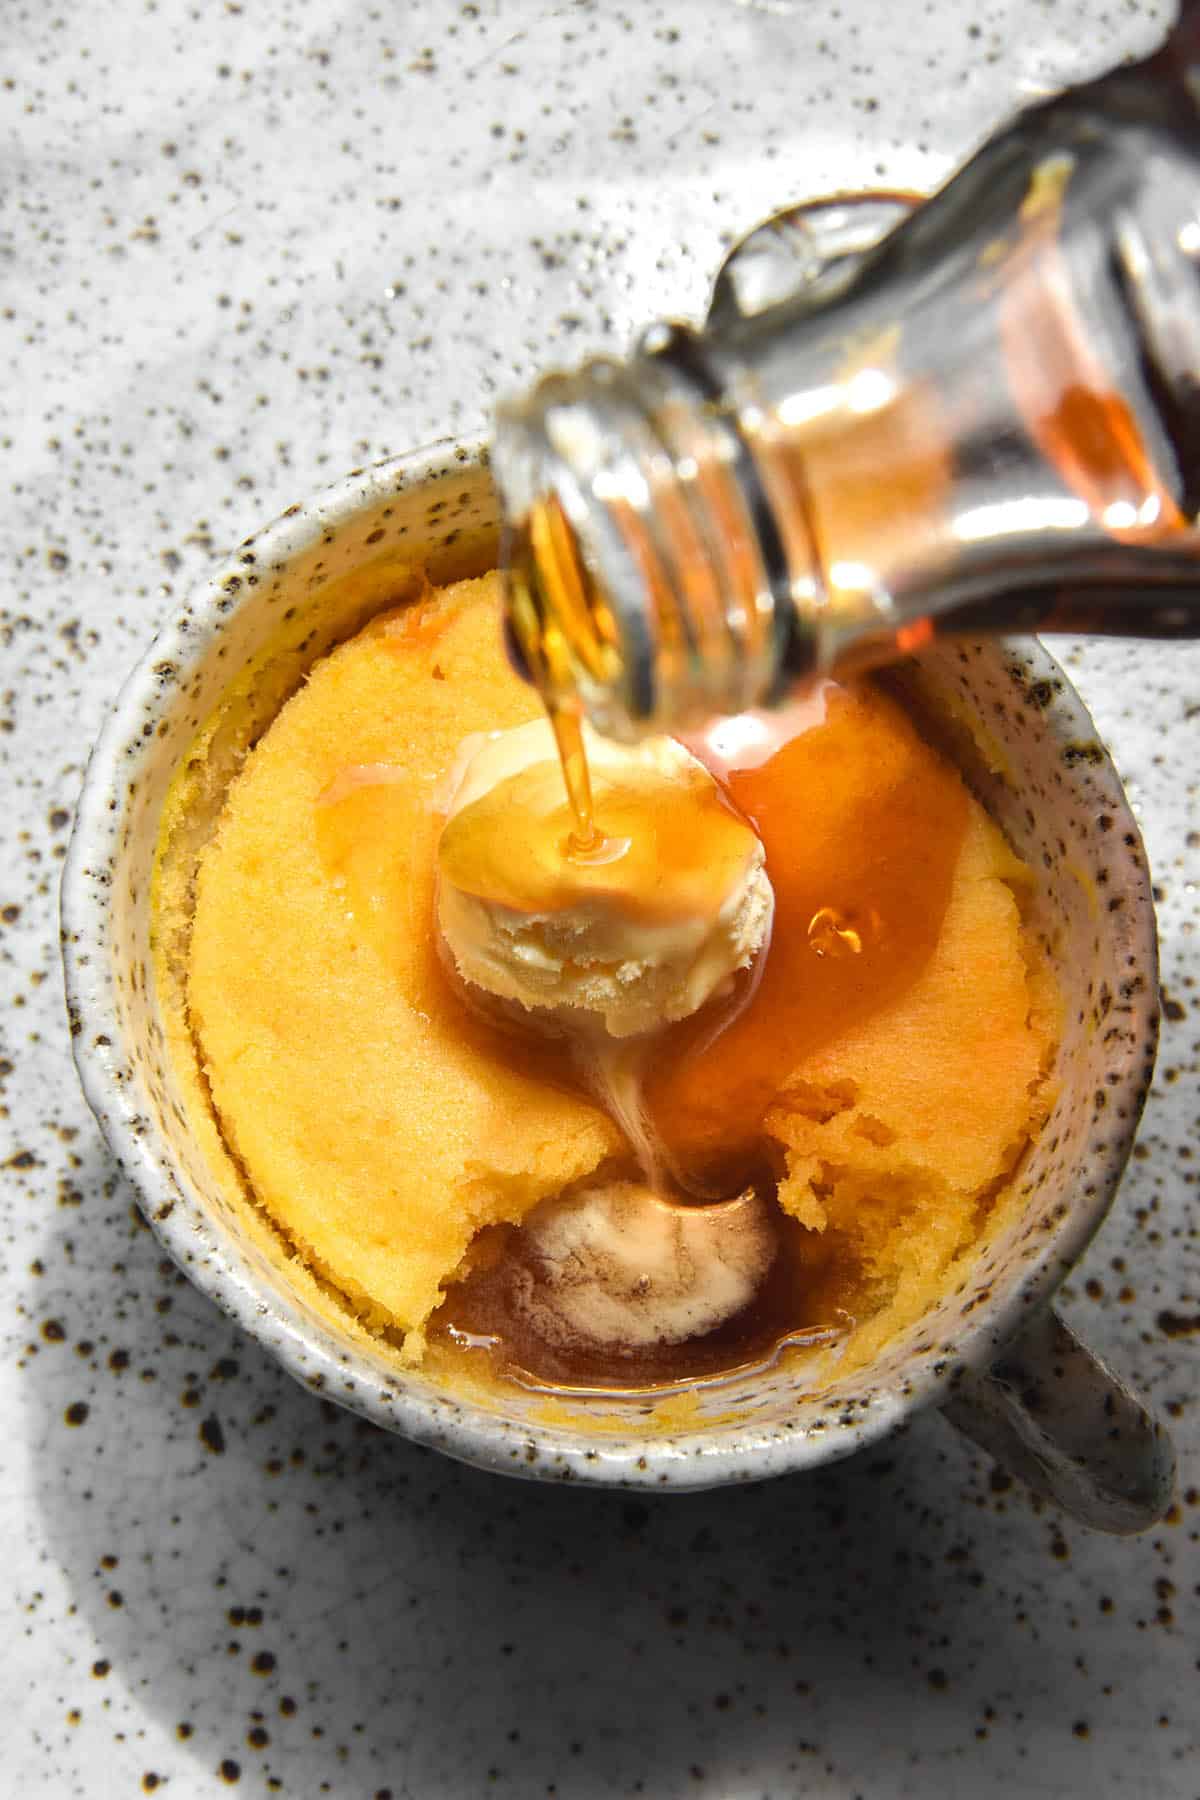 A sunlit image of a gluten free pumpkin mug cake in a white speckled ceramic mug on a white speckled ceramic plate. The mug cake is topped with a scoop of vanilla ice cream and a bottle of maple syrup extends from the centre right of the image to pour down onto the ice cream. The maple syrup and melted ice cream meld together in a pool created by a spoonful of the pudding being removed. 